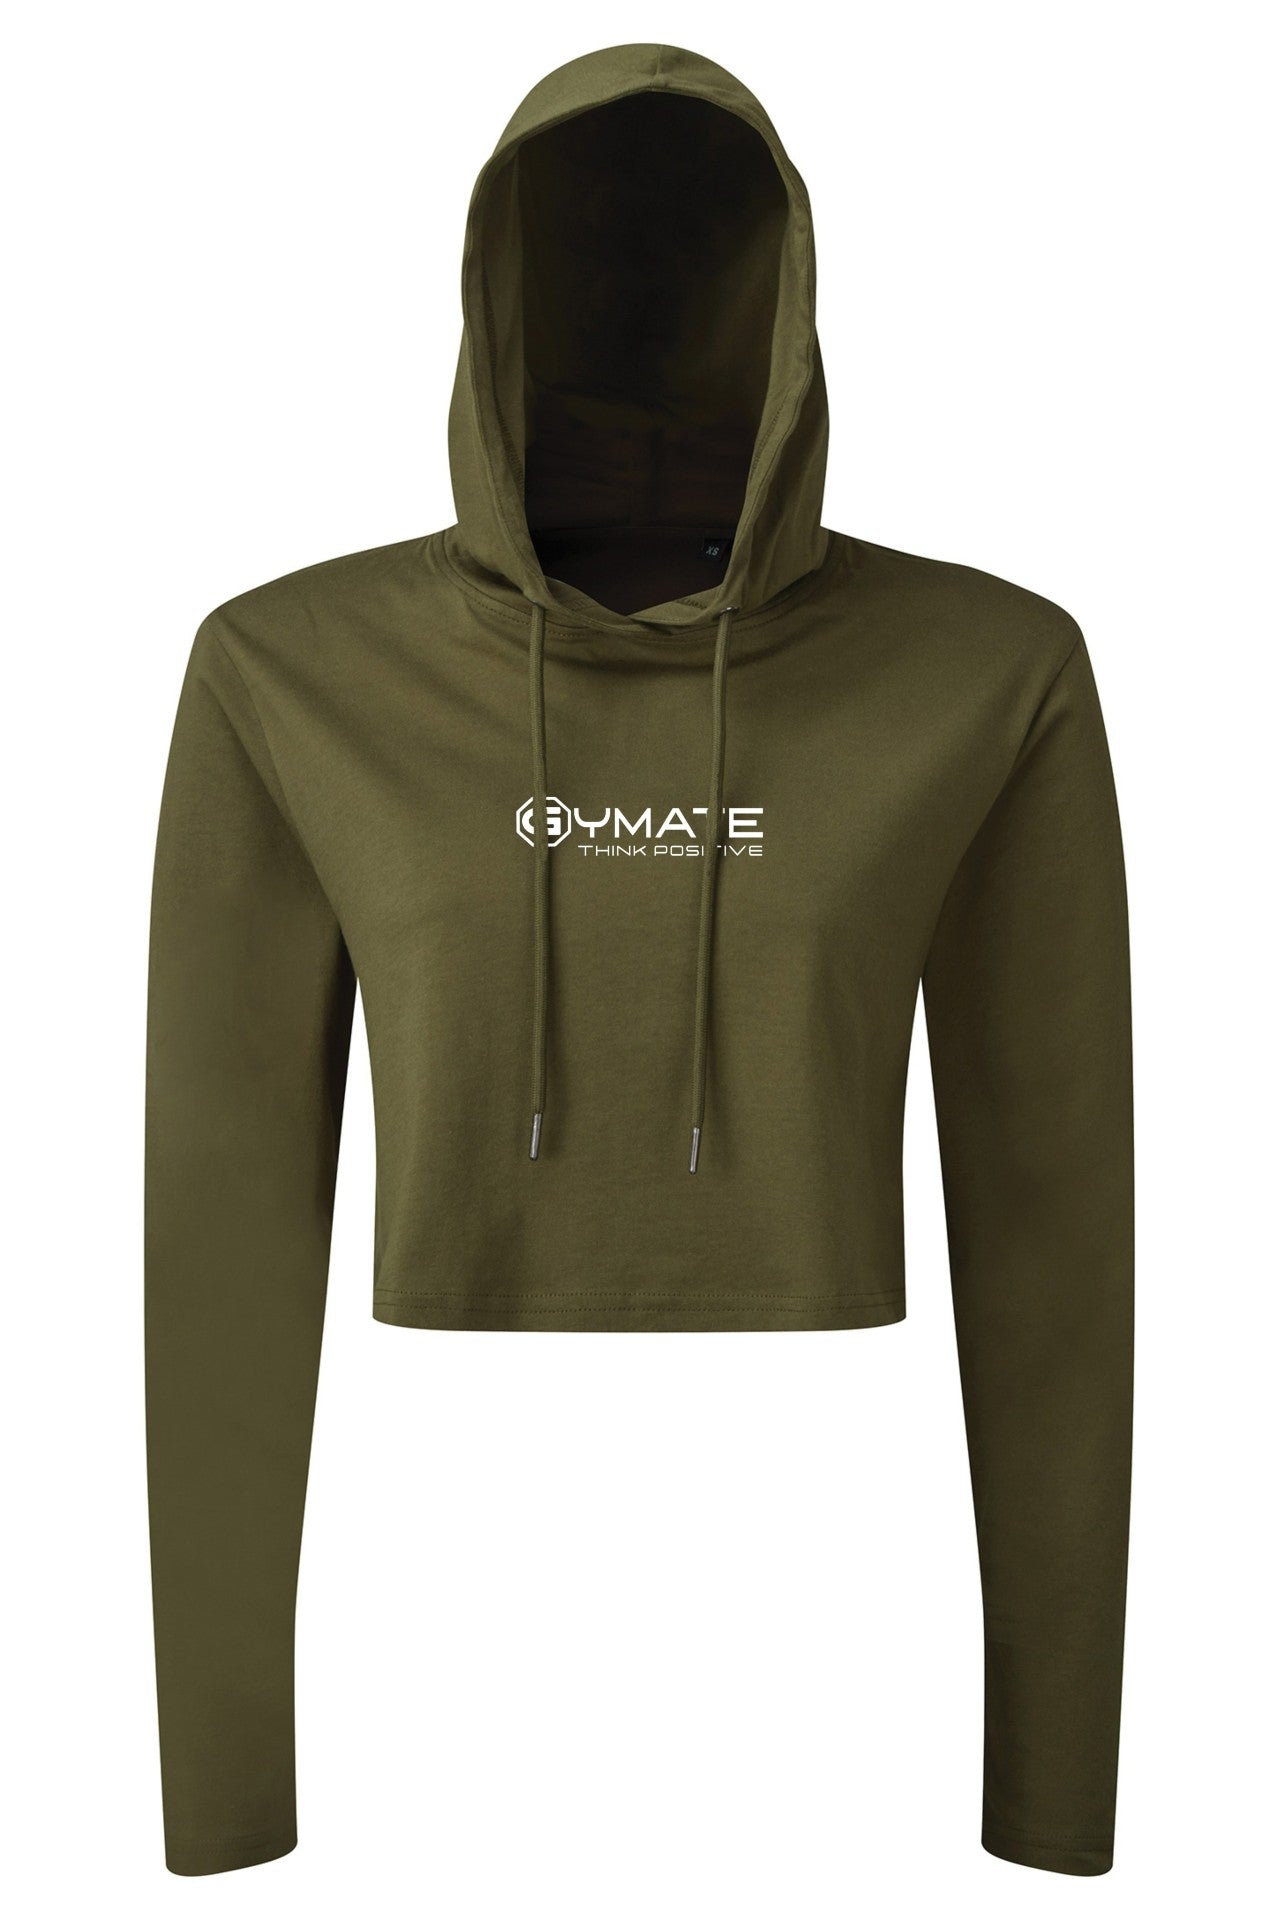 Gymate Pro cropped hooded t shirt olive